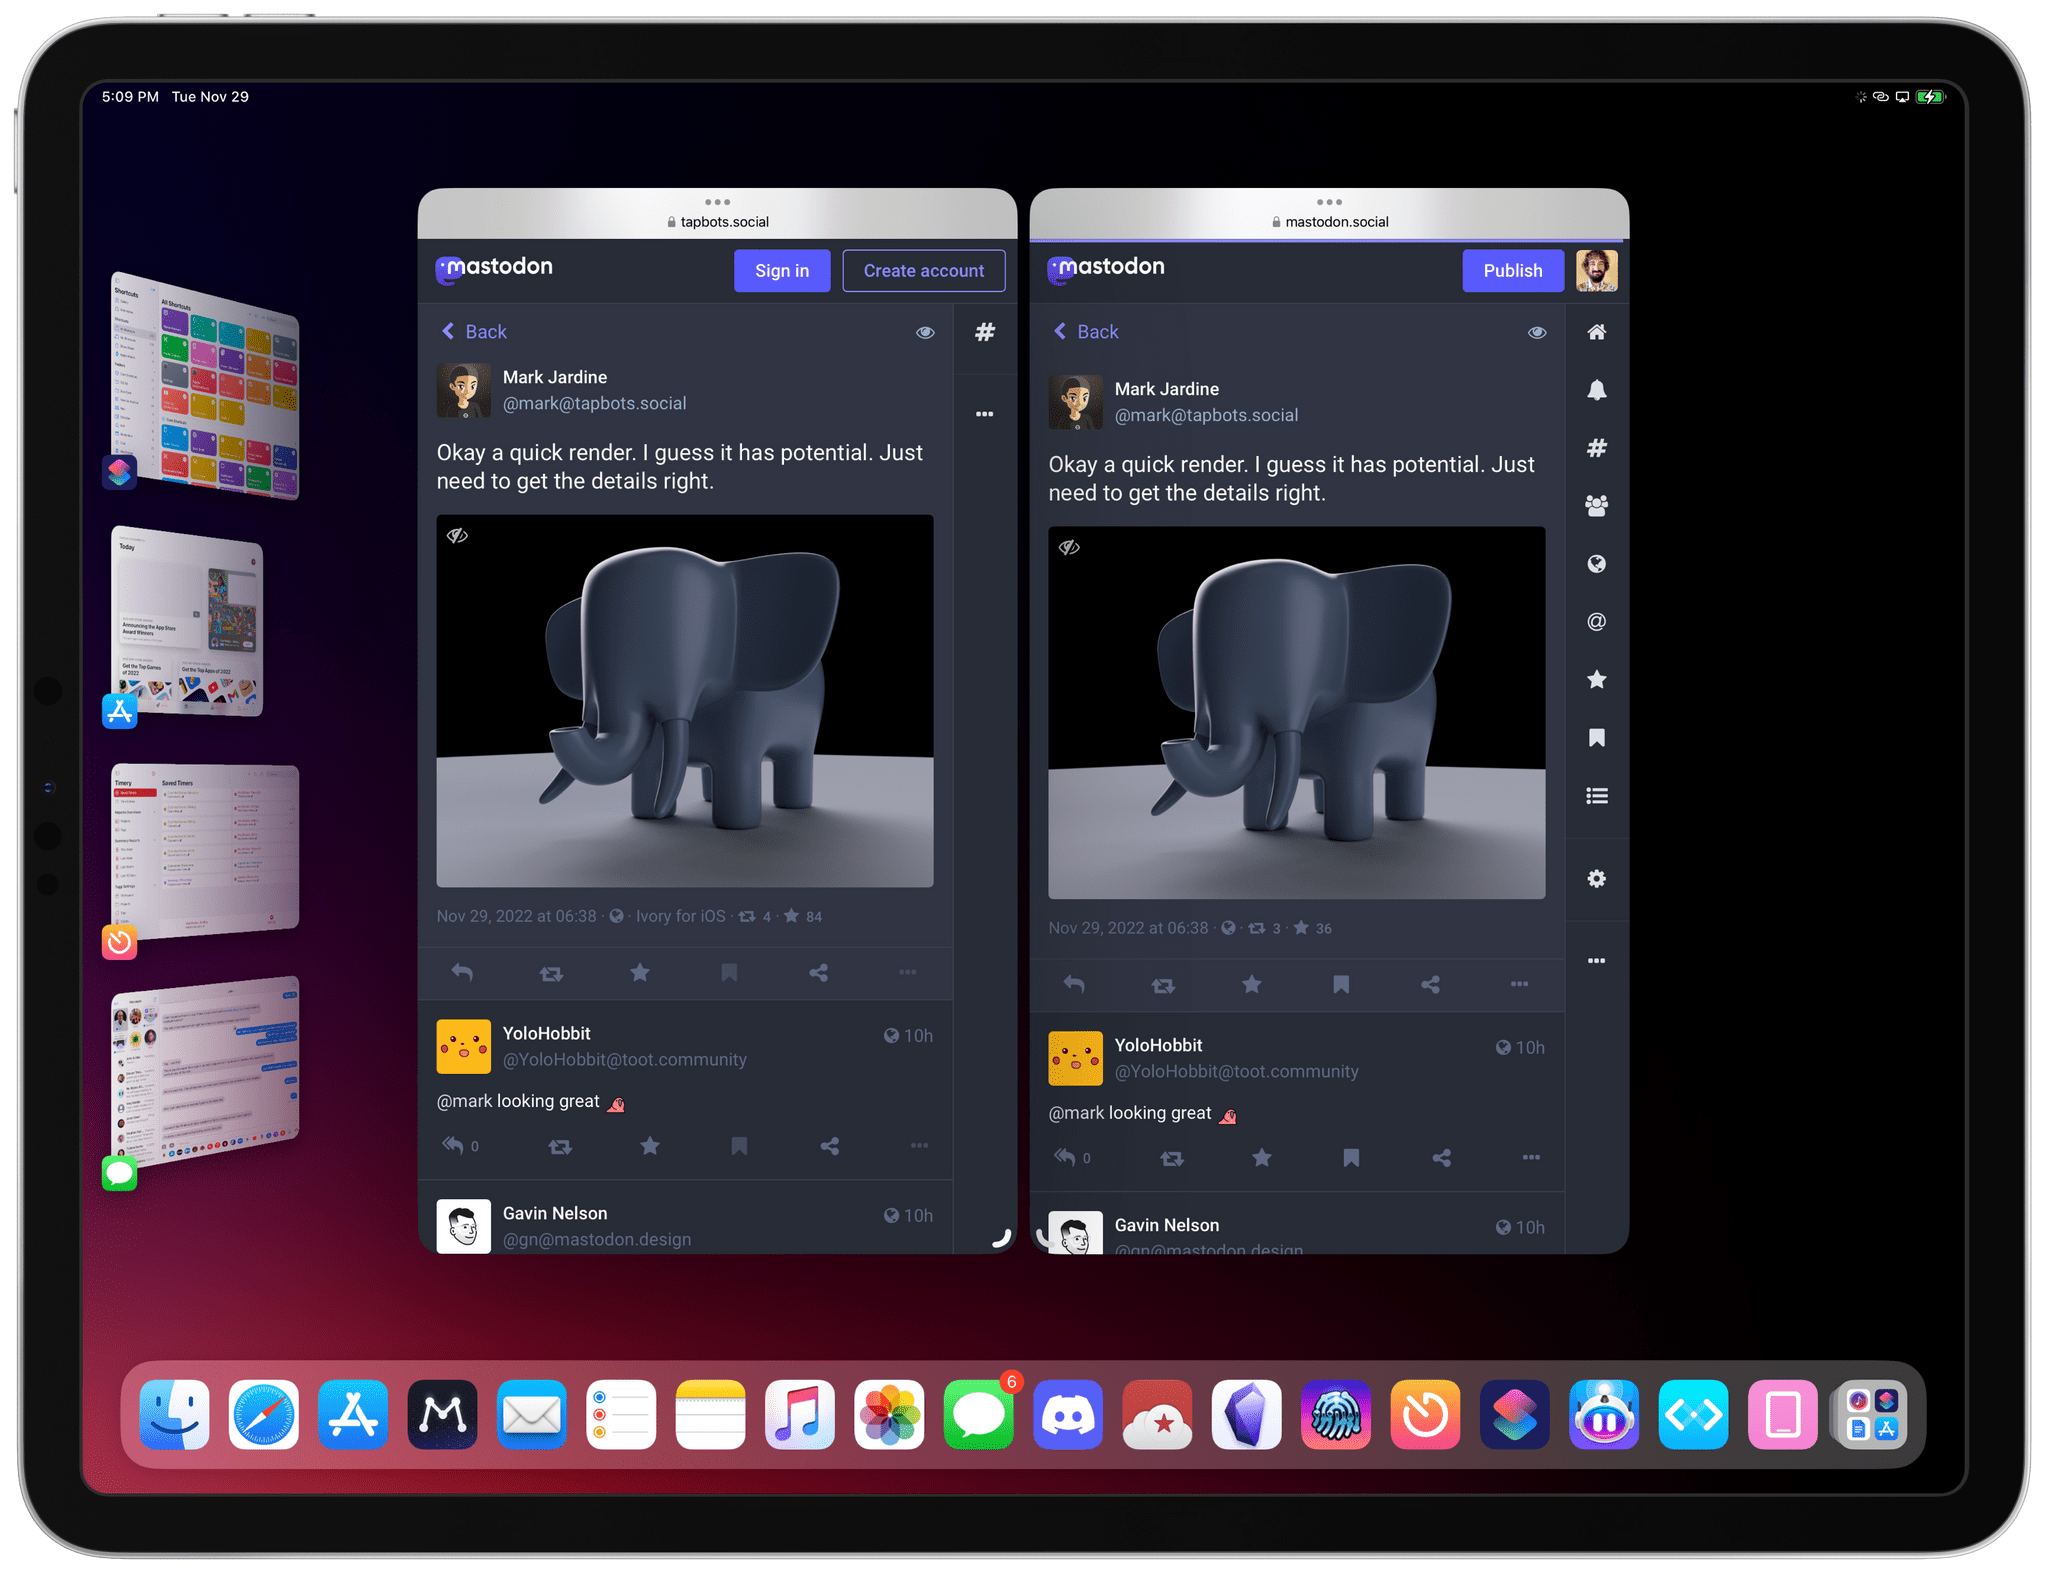 The same post viewed on its original Mastodon instance (left) vs. the instance I'm using (right). Notice how I'm signed in and can interact with the post in the Safari window on the right.